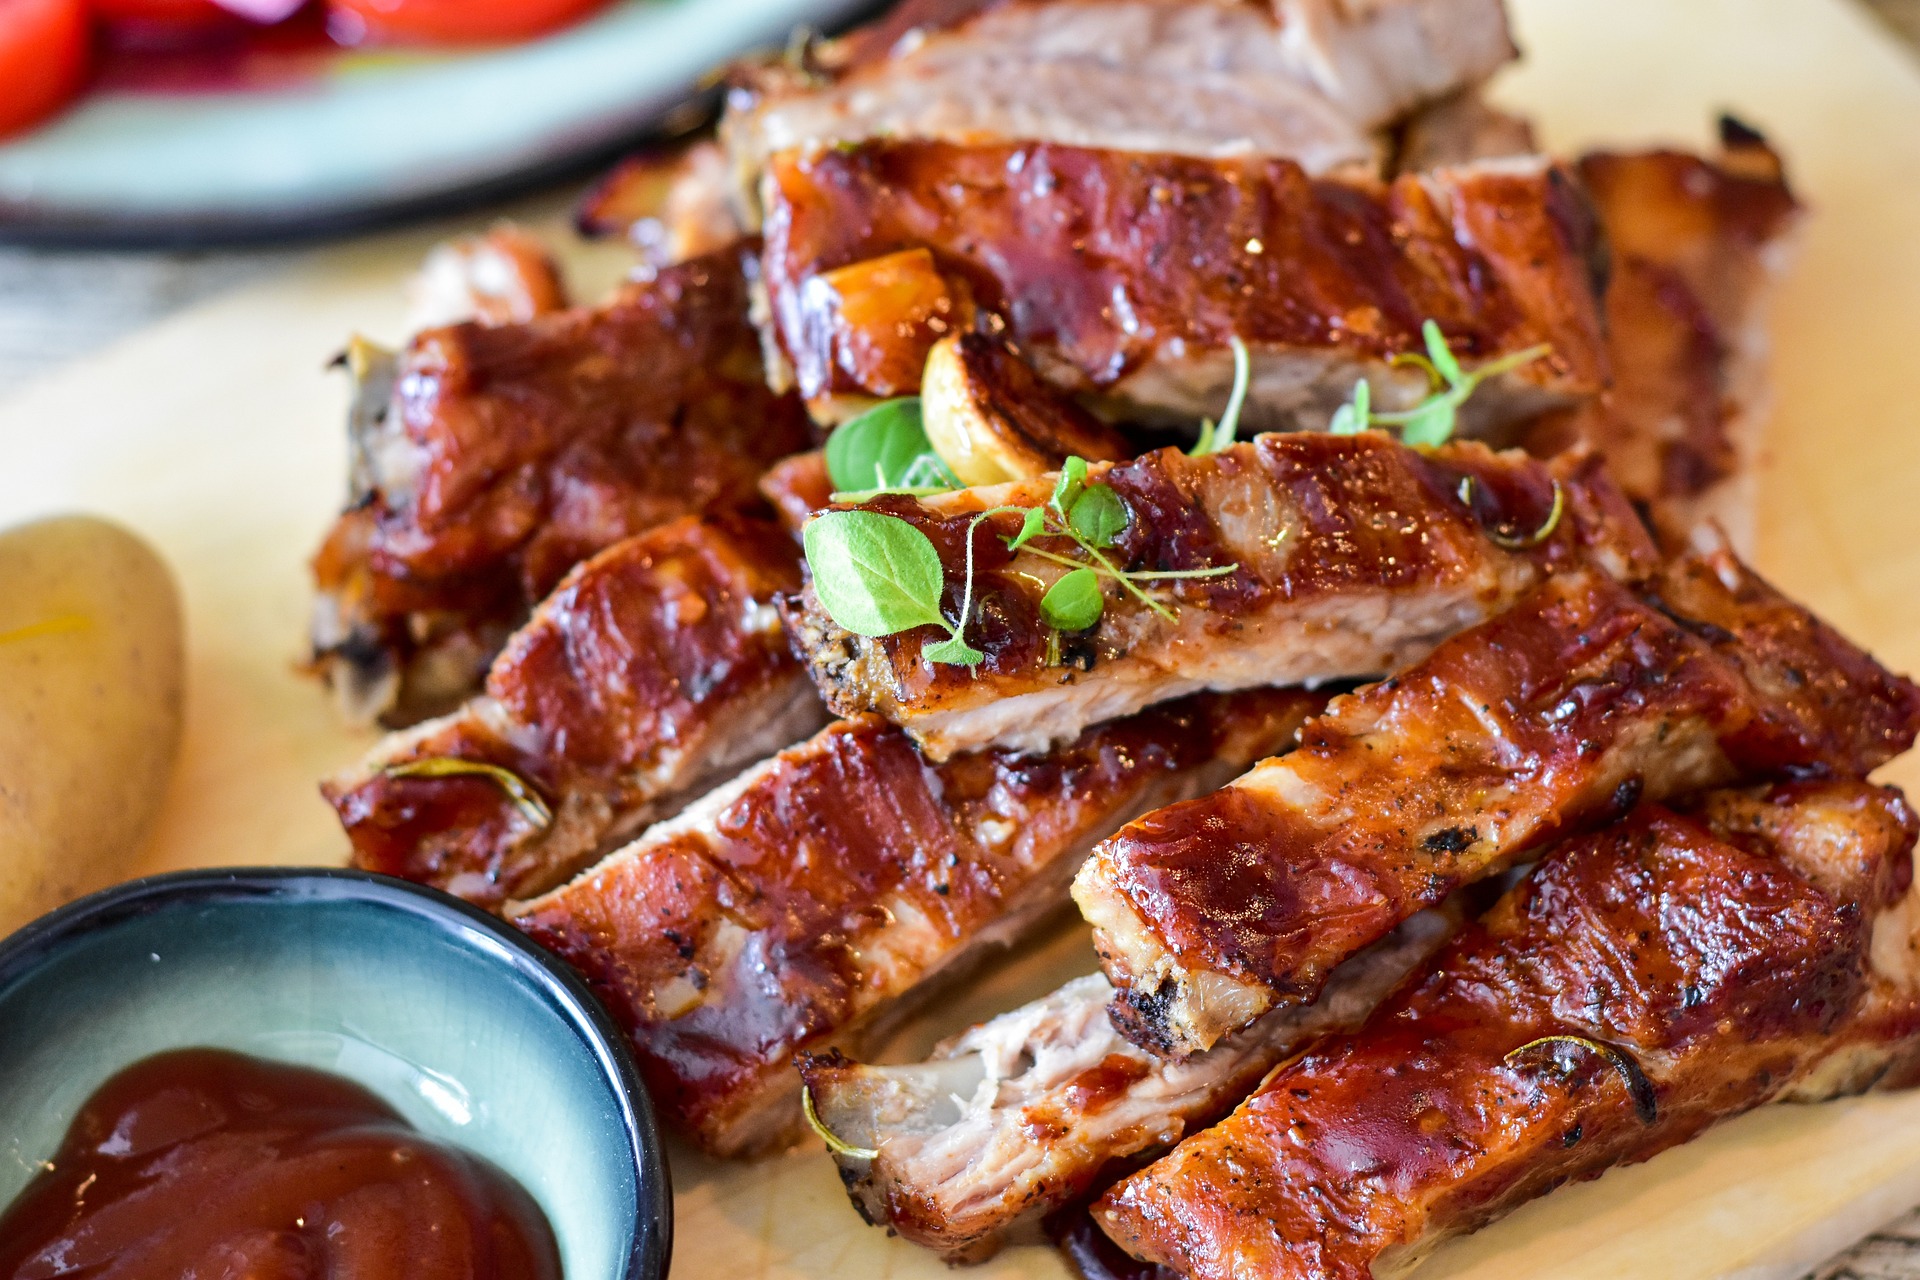 Barbeque ribs on a sheet of brown paper.